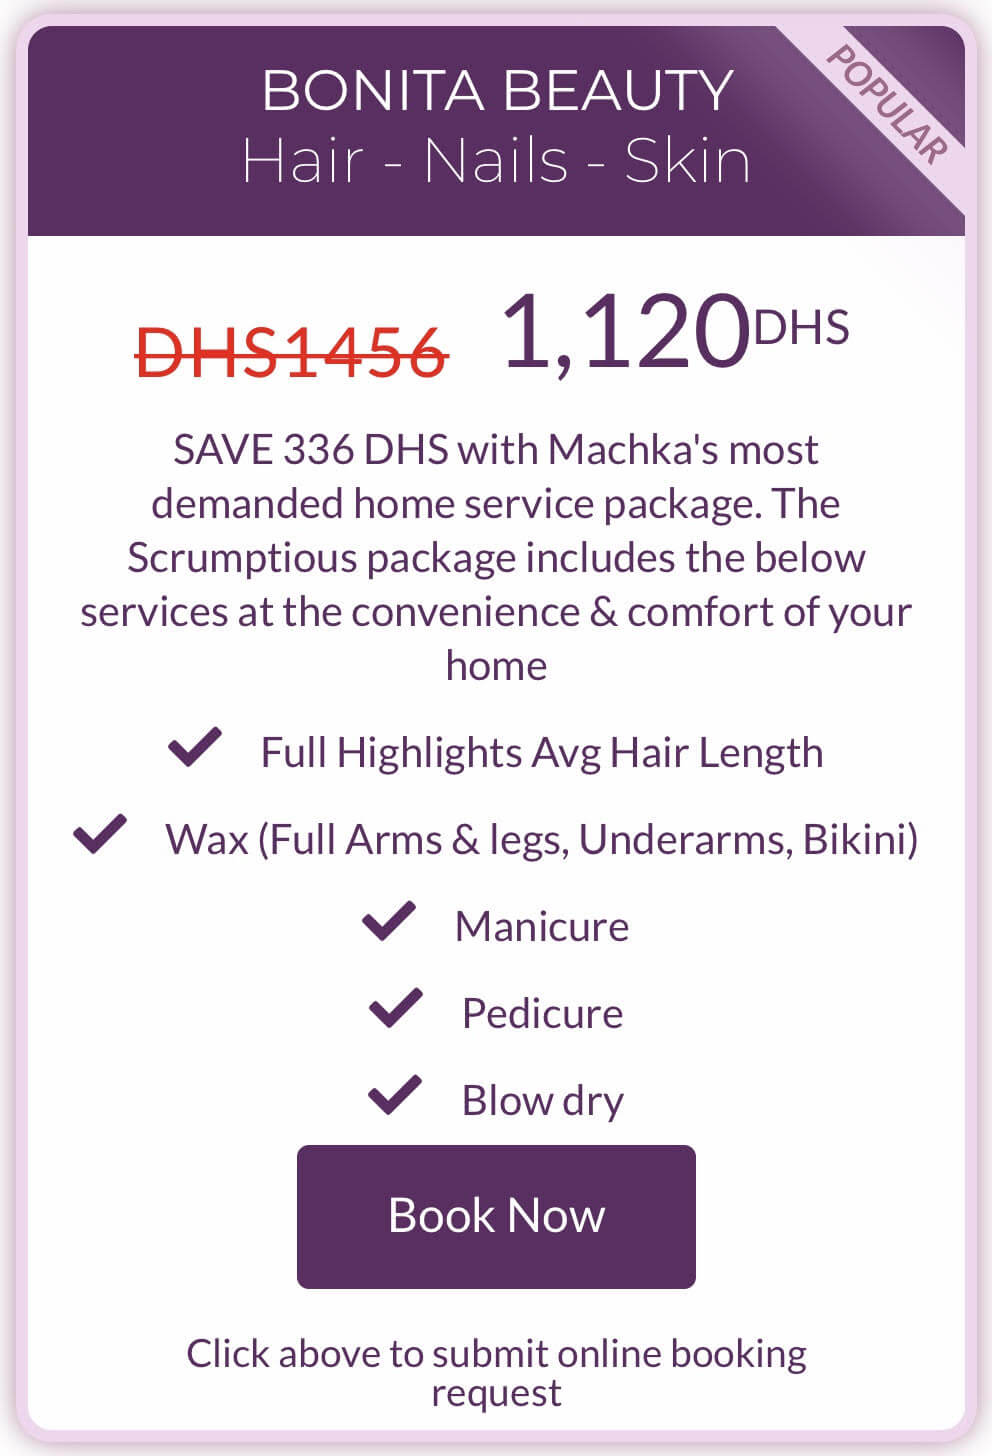 Dubai Machka Beauty & fitness services at home - Hair Salon services - Home services hair colour keratin extensions Brazilian blowout nails massage slimming personal training fitness and more - Package offer 3